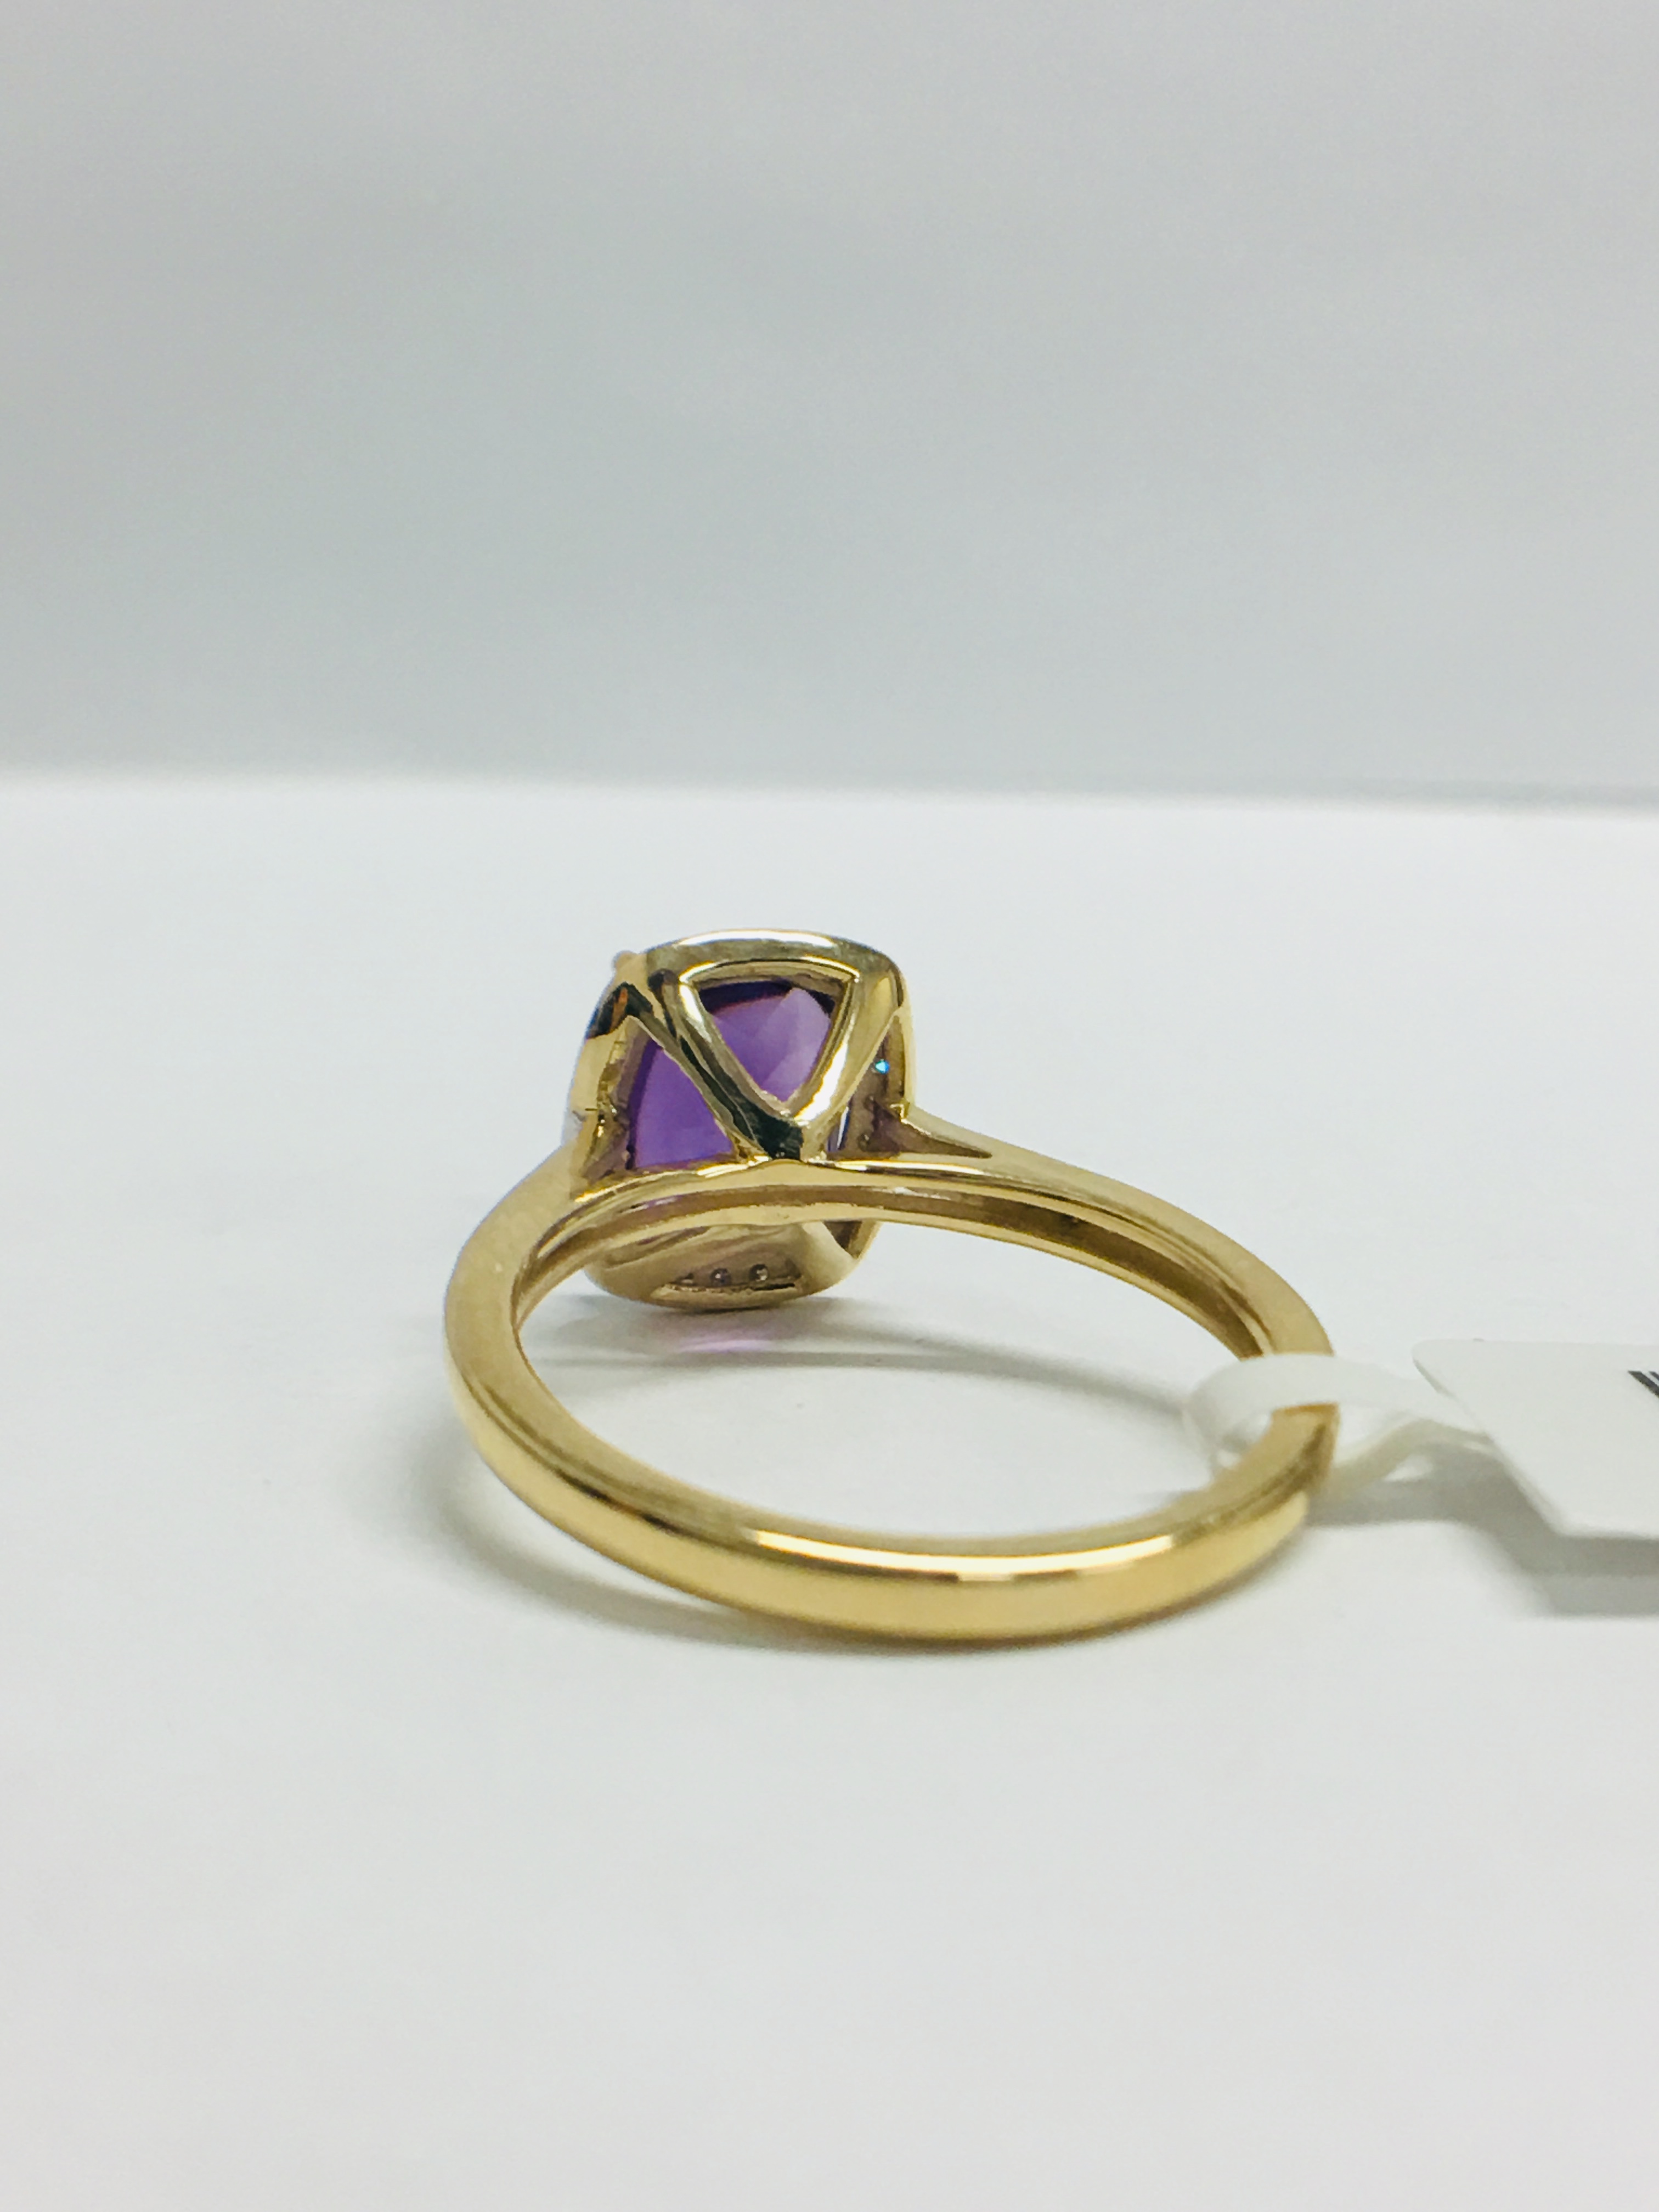 9ct yellow gold Amethyst and diamond ring - Image 5 of 11